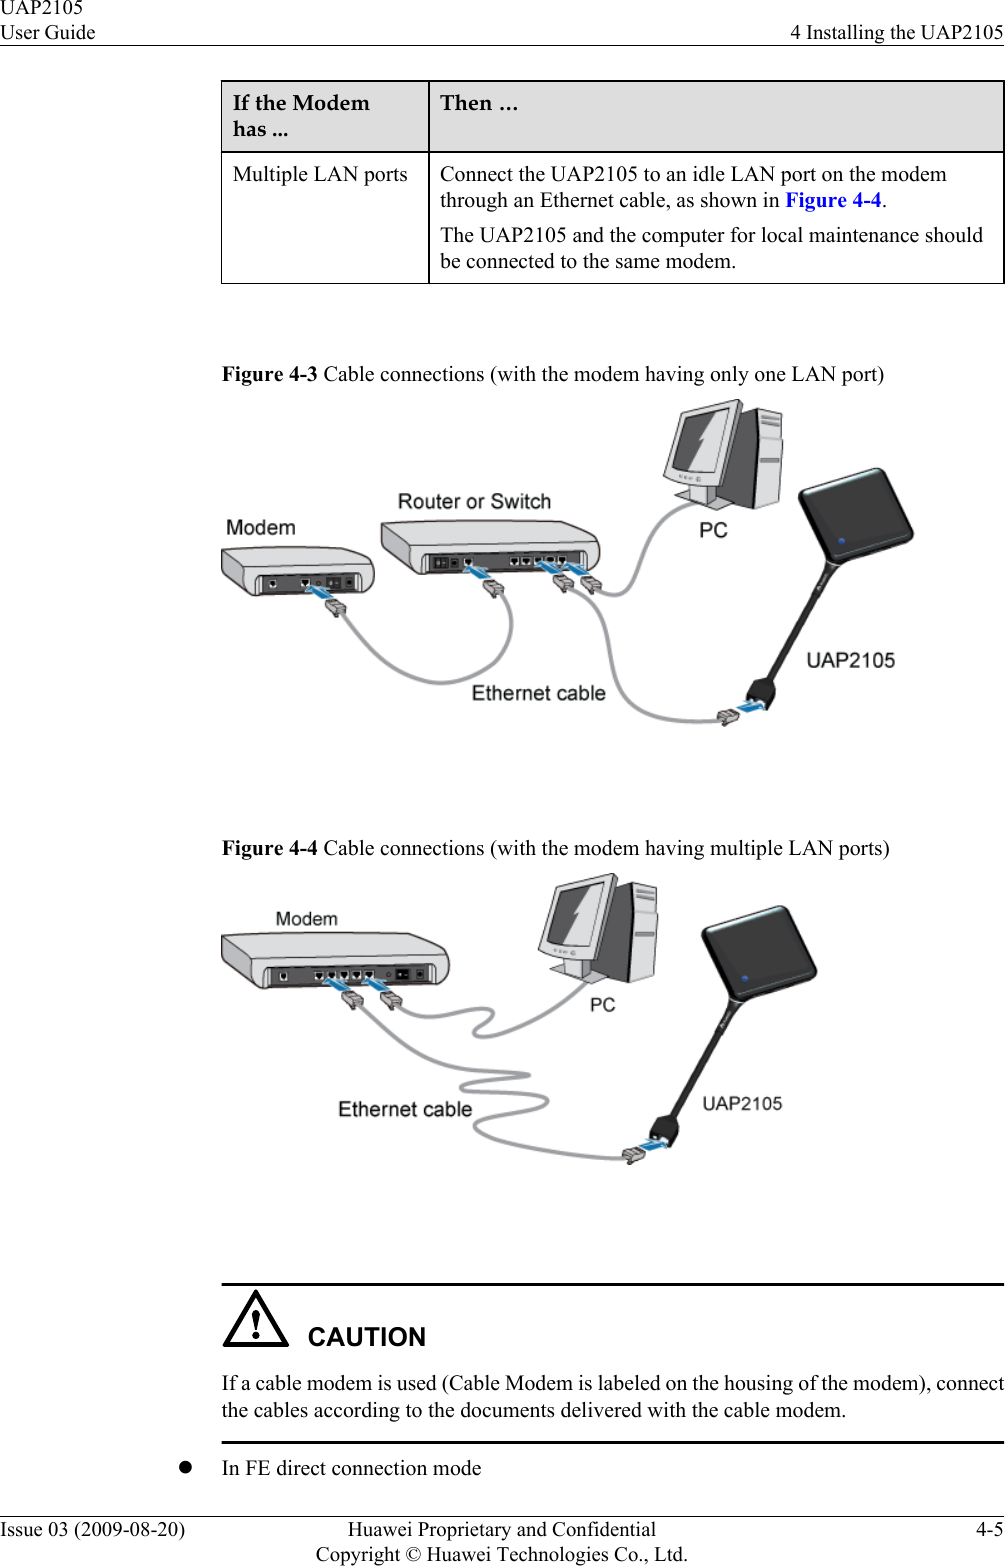 If the Modemhas ...Then …Multiple LAN ports Connect the UAP2105 to an idle LAN port on the modemthrough an Ethernet cable, as shown in Figure 4-4.The UAP2105 and the computer for local maintenance shouldbe connected to the same modem. Figure 4-3 Cable connections (with the modem having only one LAN port) Figure 4-4 Cable connections (with the modem having multiple LAN ports) CAUTIONIf a cable modem is used (Cable Modem is labeled on the housing of the modem), connectthe cables according to the documents delivered with the cable modem.lIn FE direct connection modeUAP2105User Guide 4 Installing the UAP2105Issue 03 (2009-08-20) Huawei Proprietary and ConfidentialCopyright © Huawei Technologies Co., Ltd.4-5